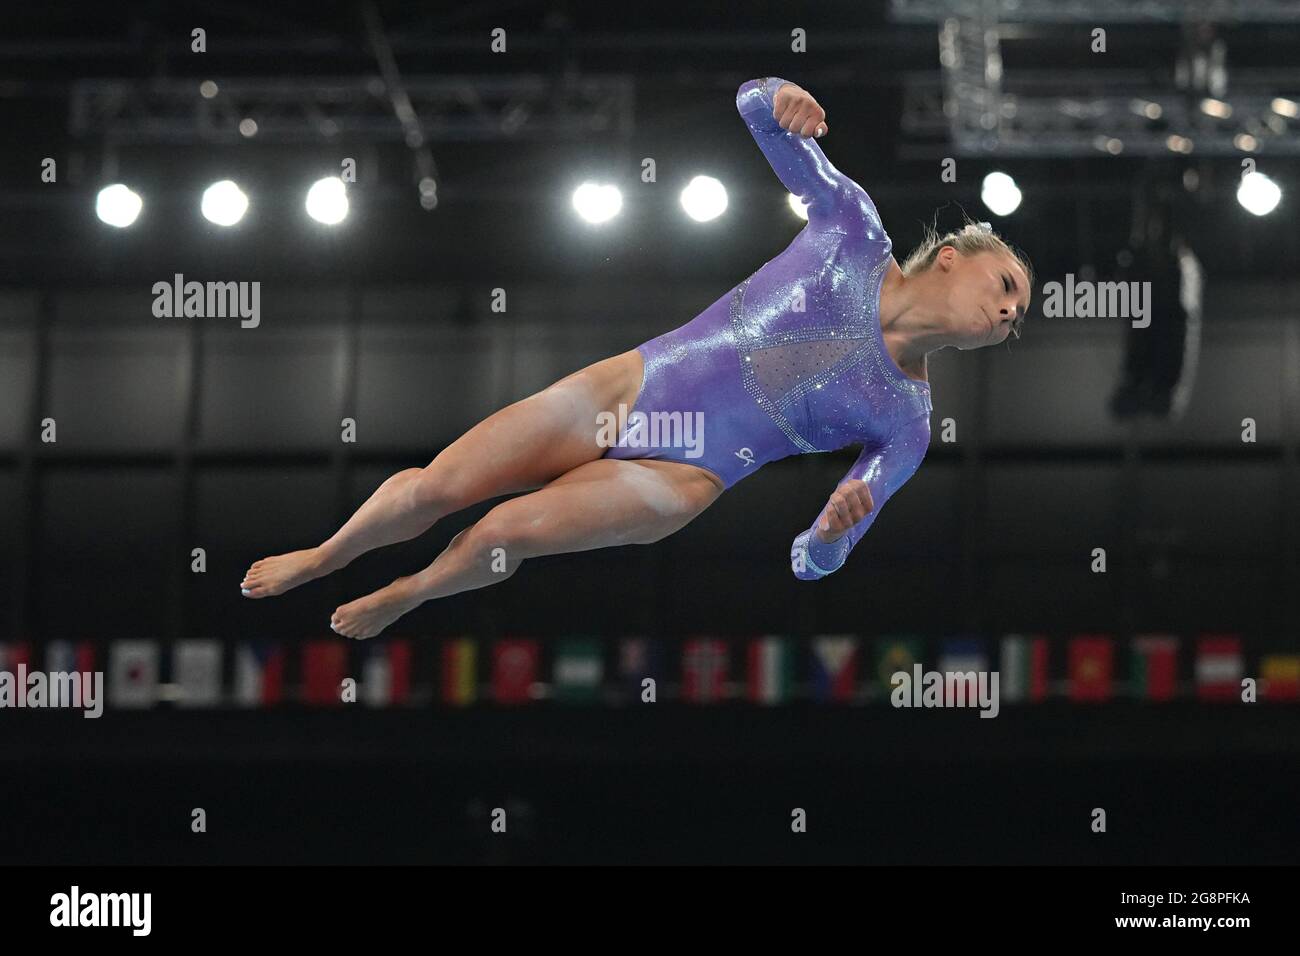 Tokyo, Japan. 22nd July, 2021. United States Gymnast Mykayla Skinner practices her dismount on the balance beam at Ariake Gymnastics Centre before the start of the Tokyo Olympic Games in Tokyo, Japan, on Thursday July 22, 2021. Photo by Richard Ellis/UPI. Credit: UPI/Alamy Live News Stock Photo